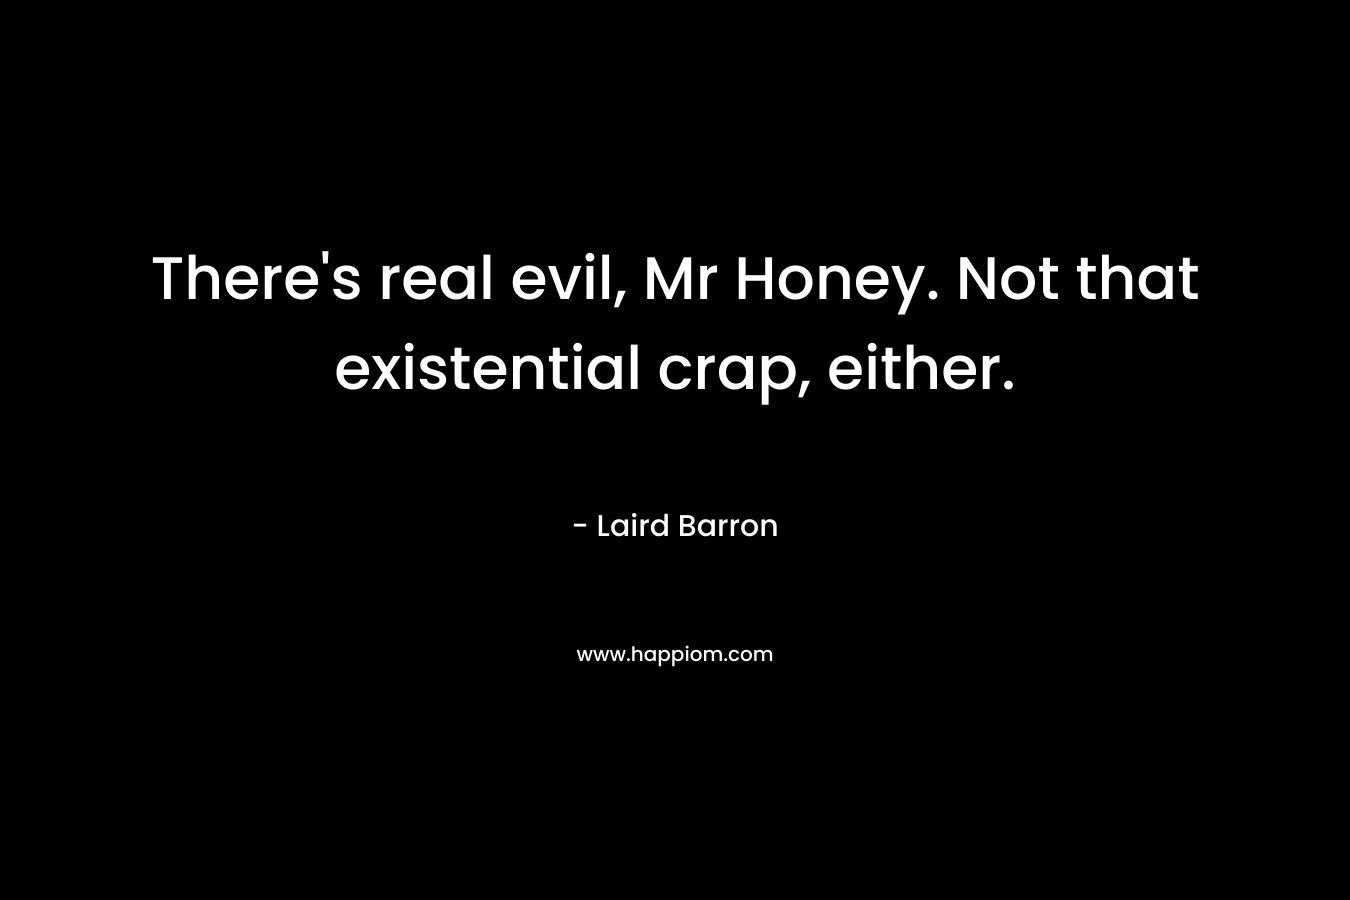 There’s real evil, Mr Honey. Not that existential crap, either. – Laird Barron